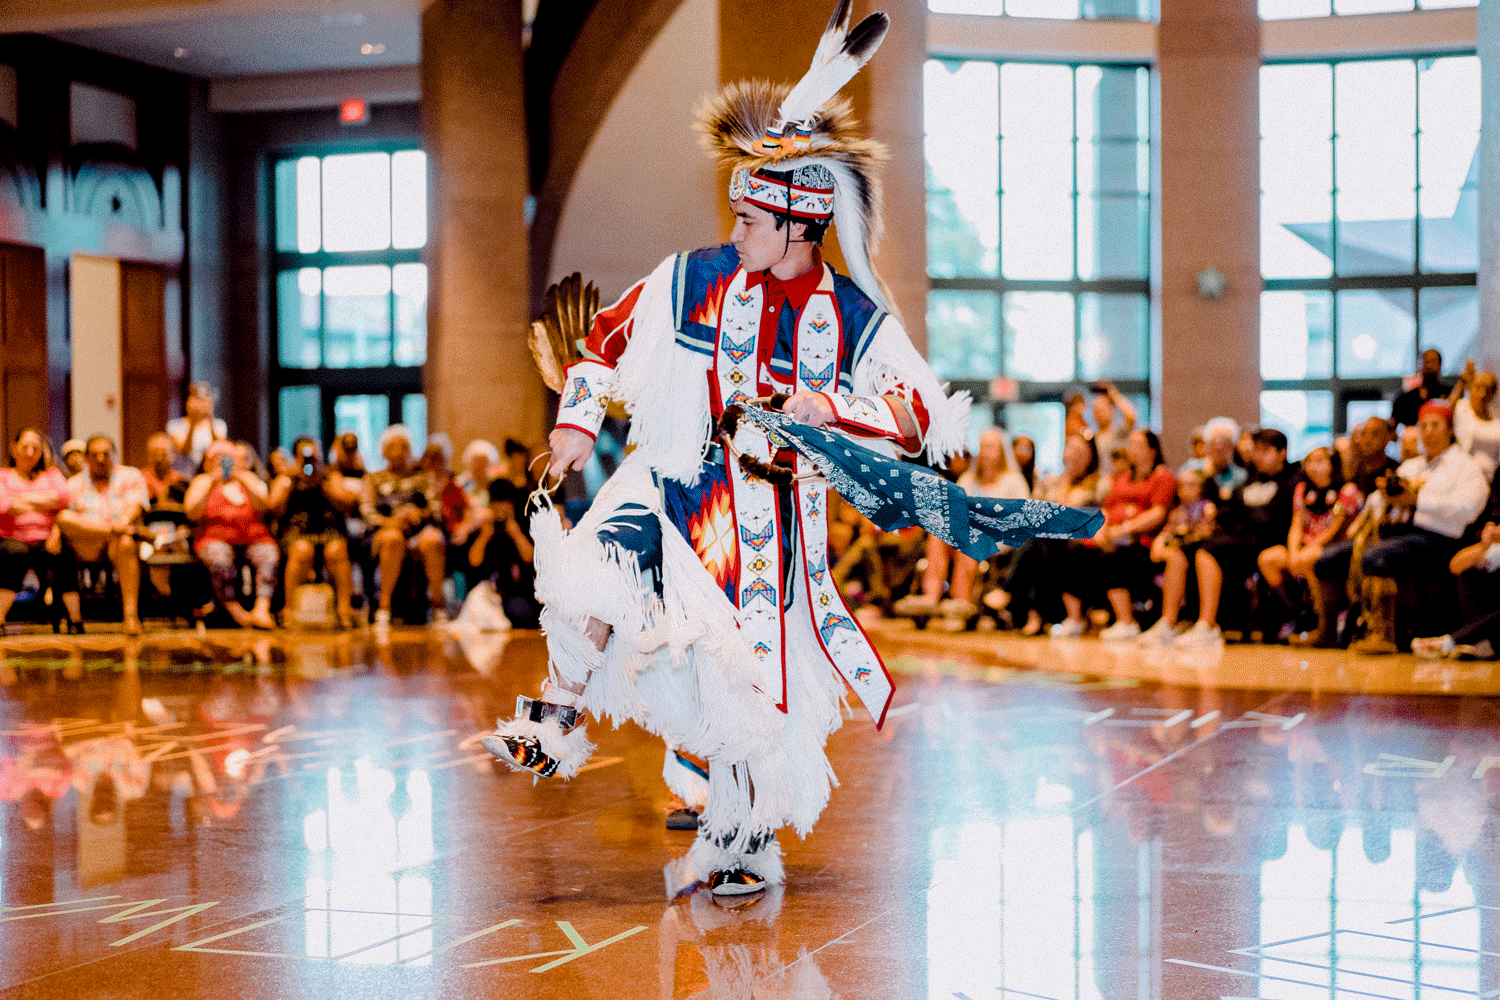 American Indian Heritage Day 2021 will feature two dancing and drumming performances by Great Promise for American Indians.